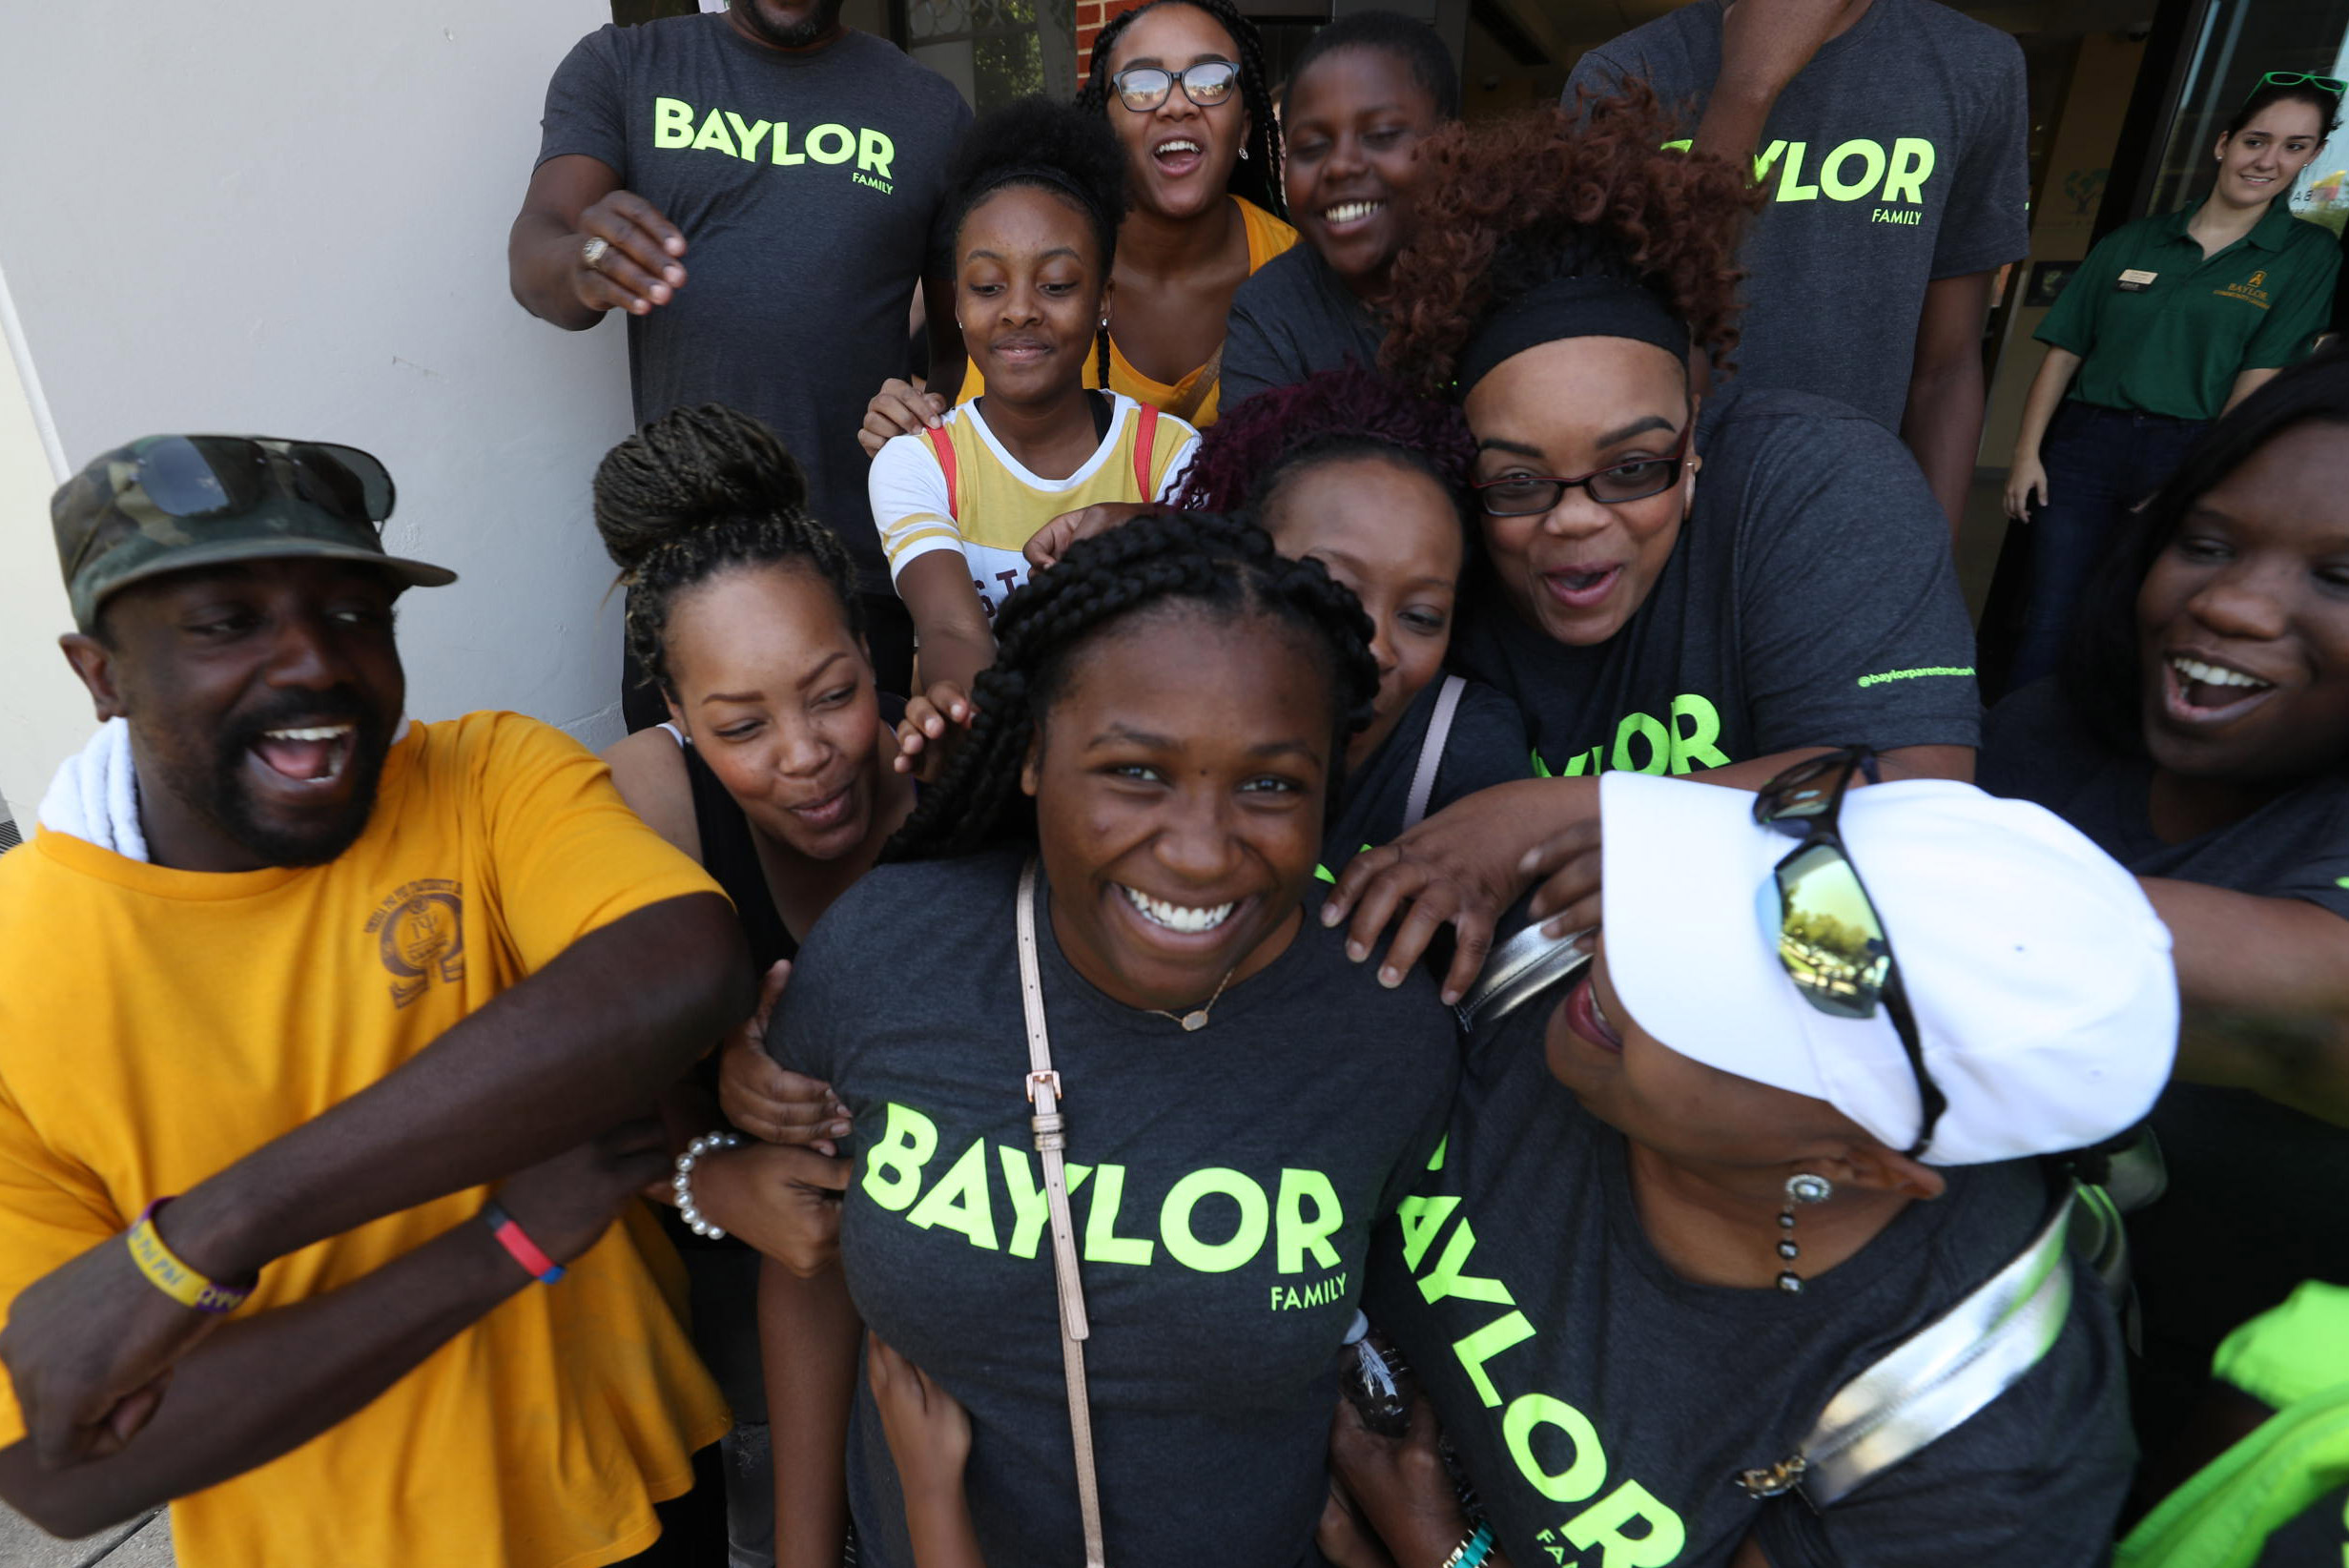 New Baylor student and her family